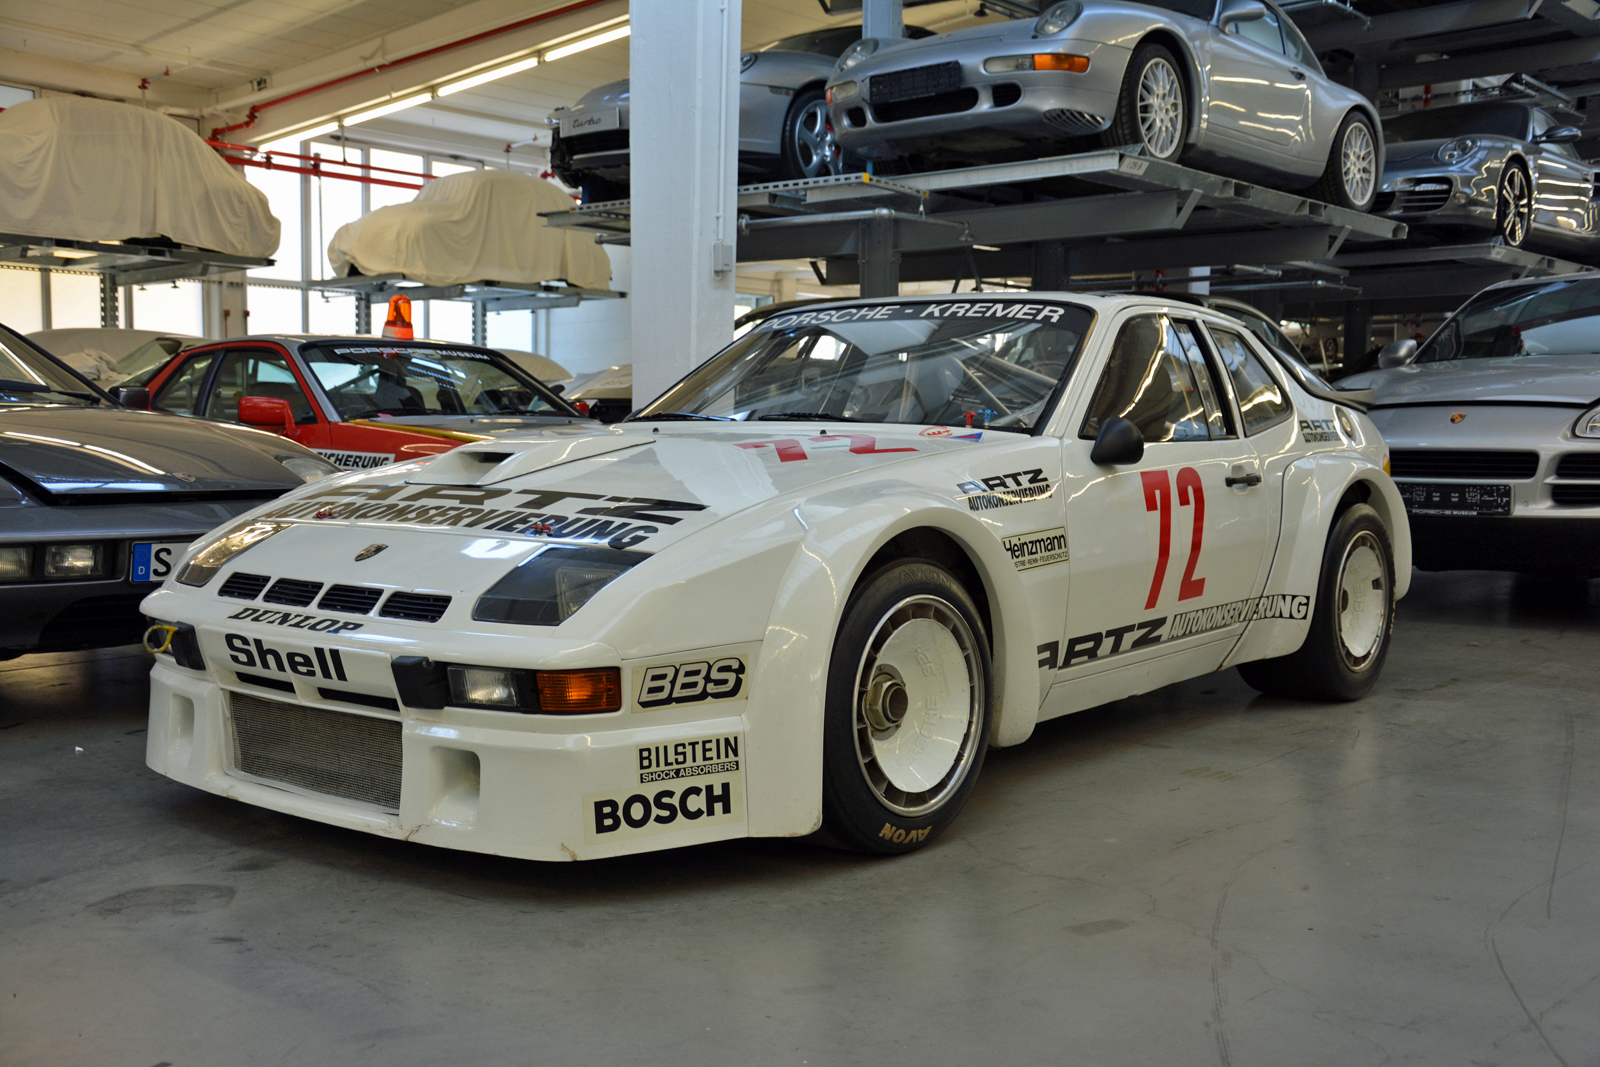 <p>The 924 Carrera GTR is another homologation special. Porsche built 17 examples of the car in 1980 to satisfy Group 4 regulations. Each one left the factory with a <strong>bigger intercooler</strong>, an integrated roll cage, an adjustable suspension and bigger brakes carried over from the 935.</p>